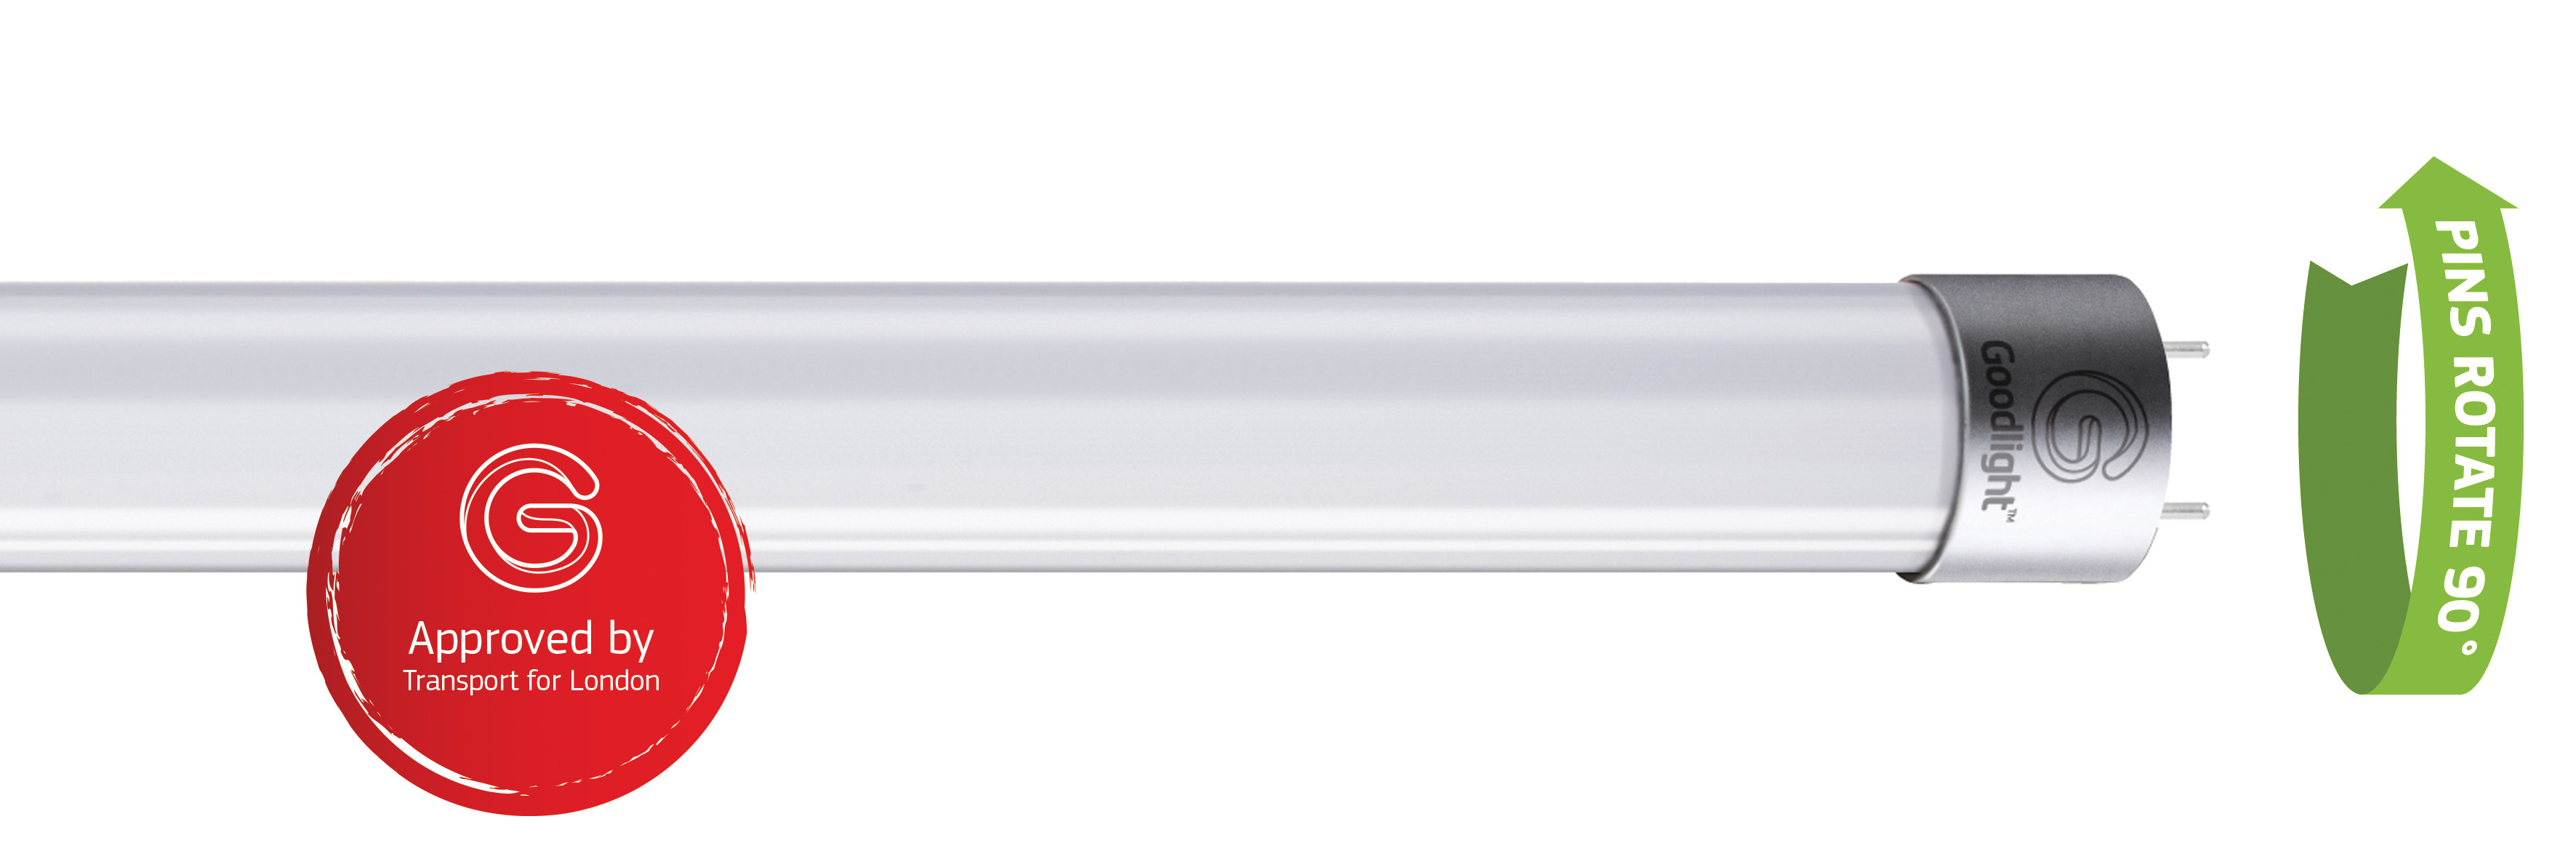 Lick garlic participate Extraordinary LED Tubes with Ordinary Fittings - Goodlight